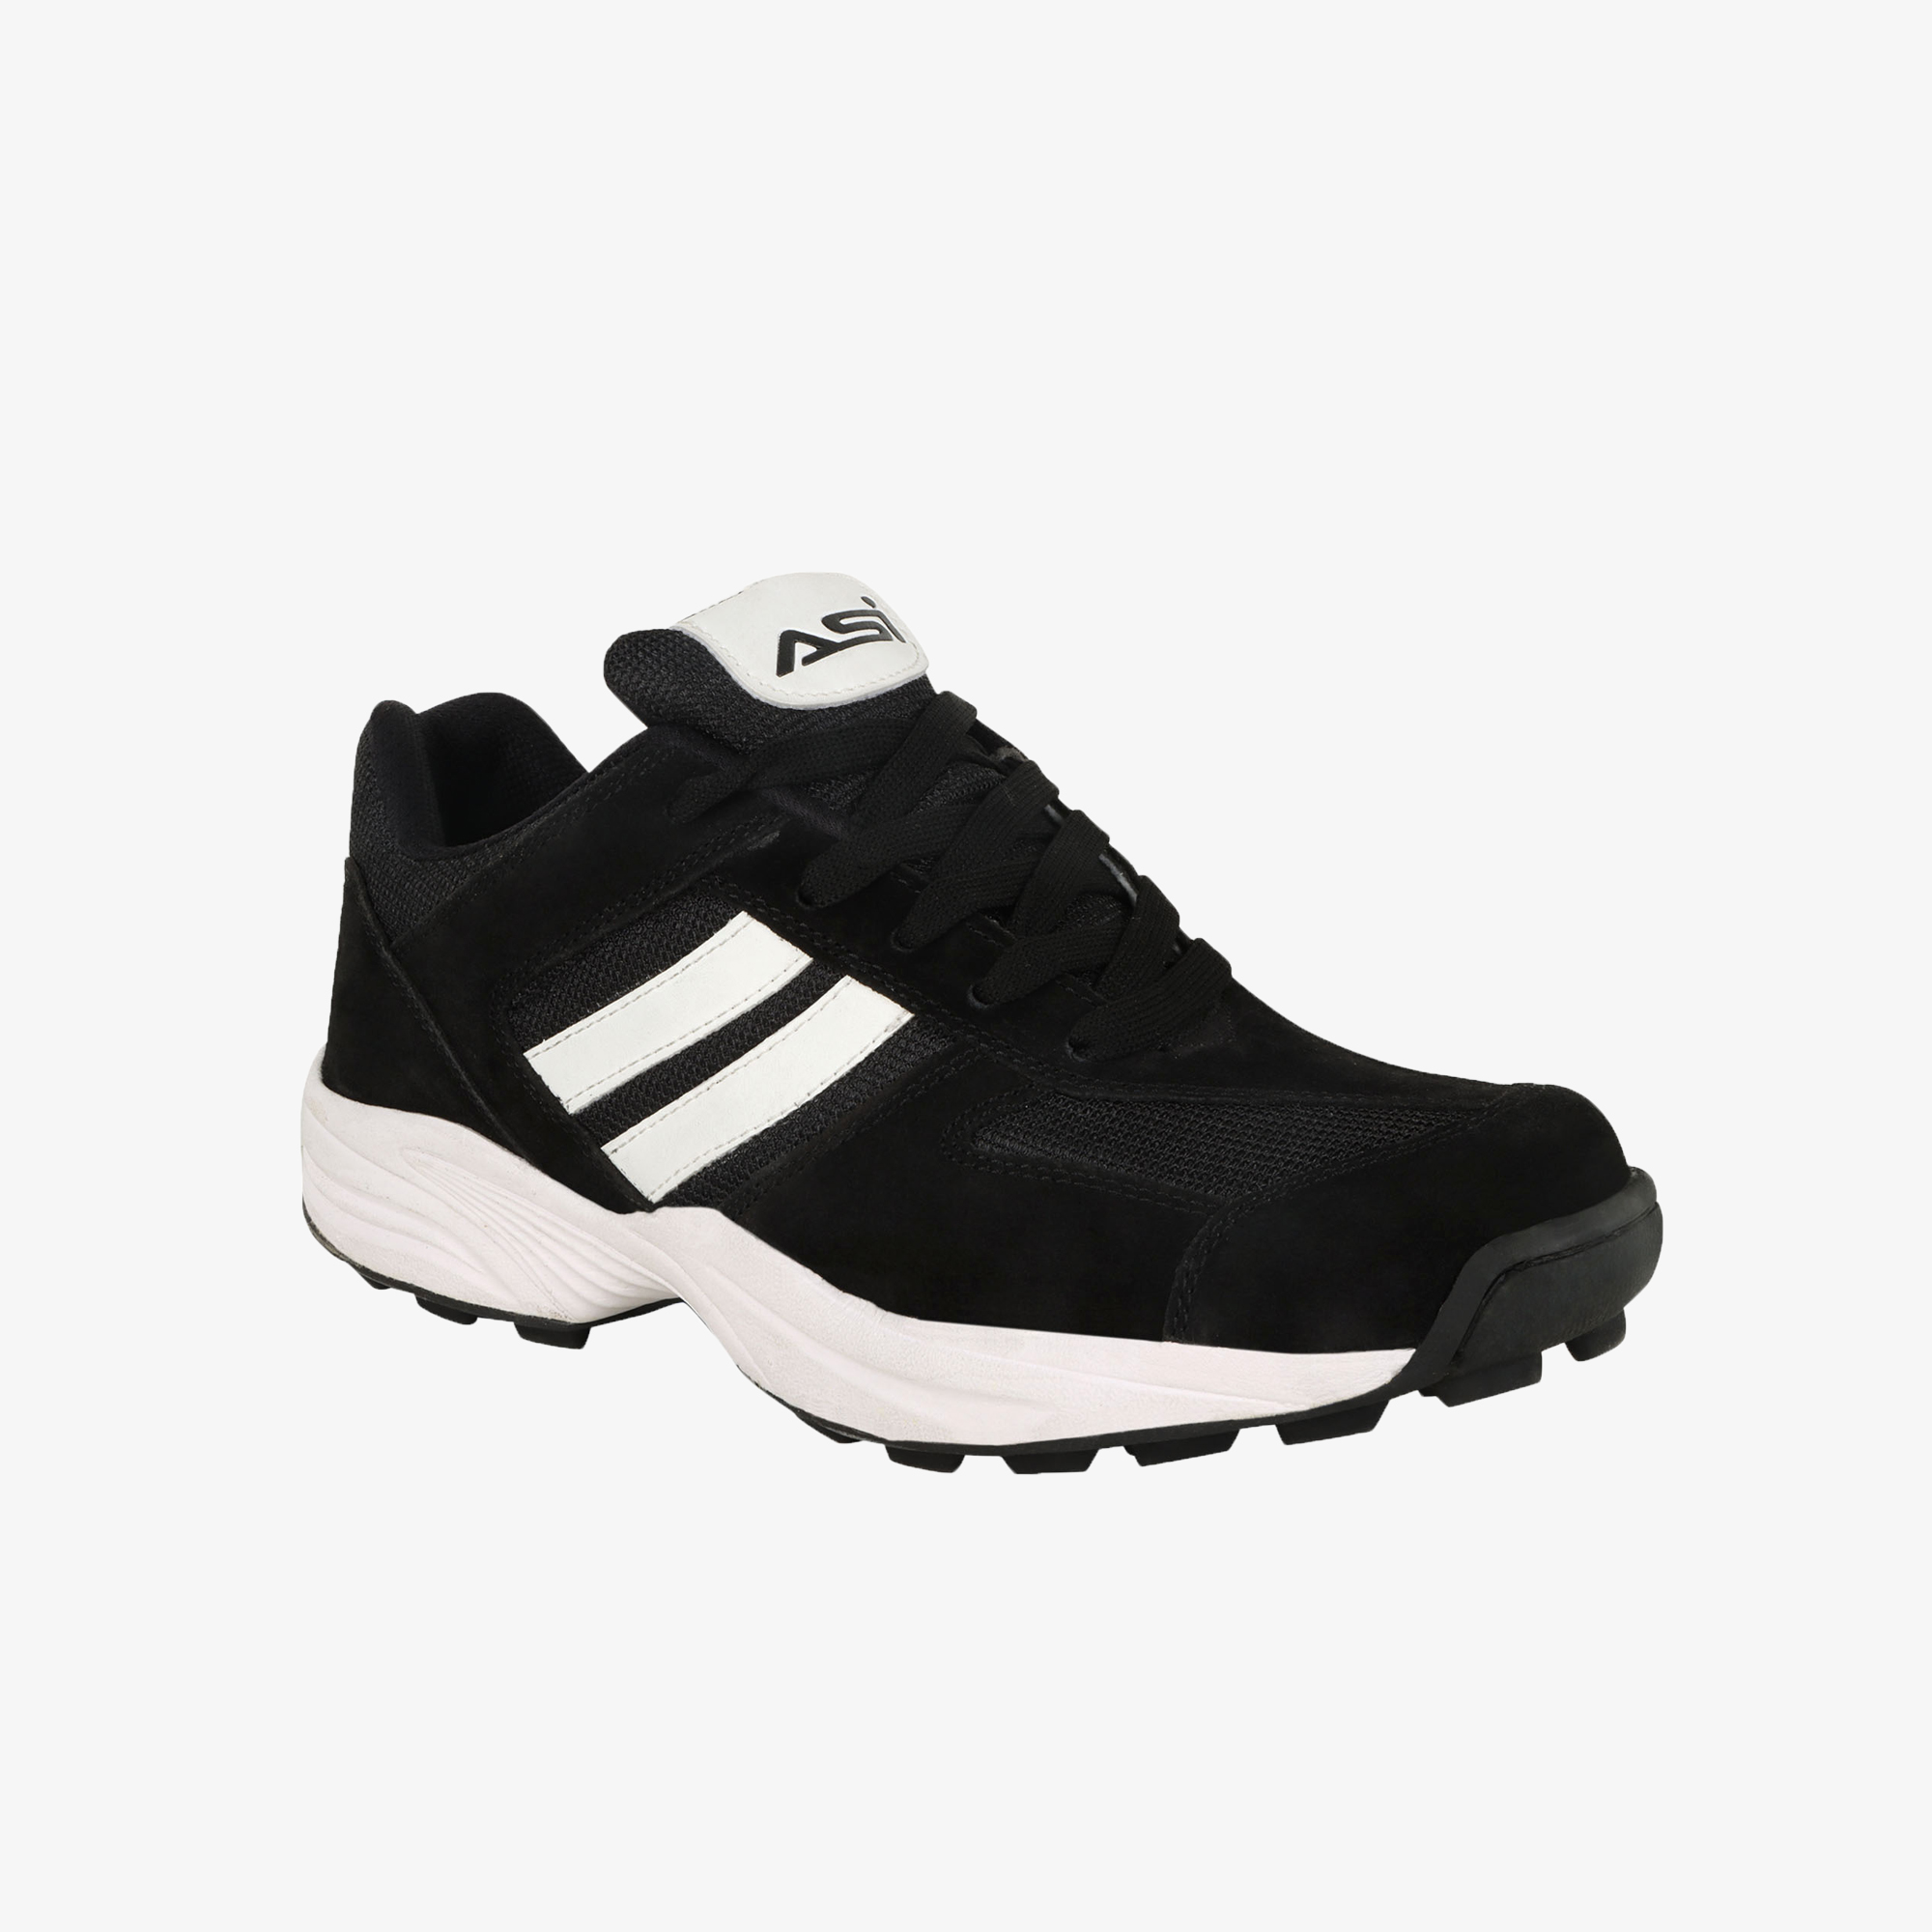 Men's Sports Shoes Sneakers 2021 New Shock India | Ubuy-saigonsouth.com.vn